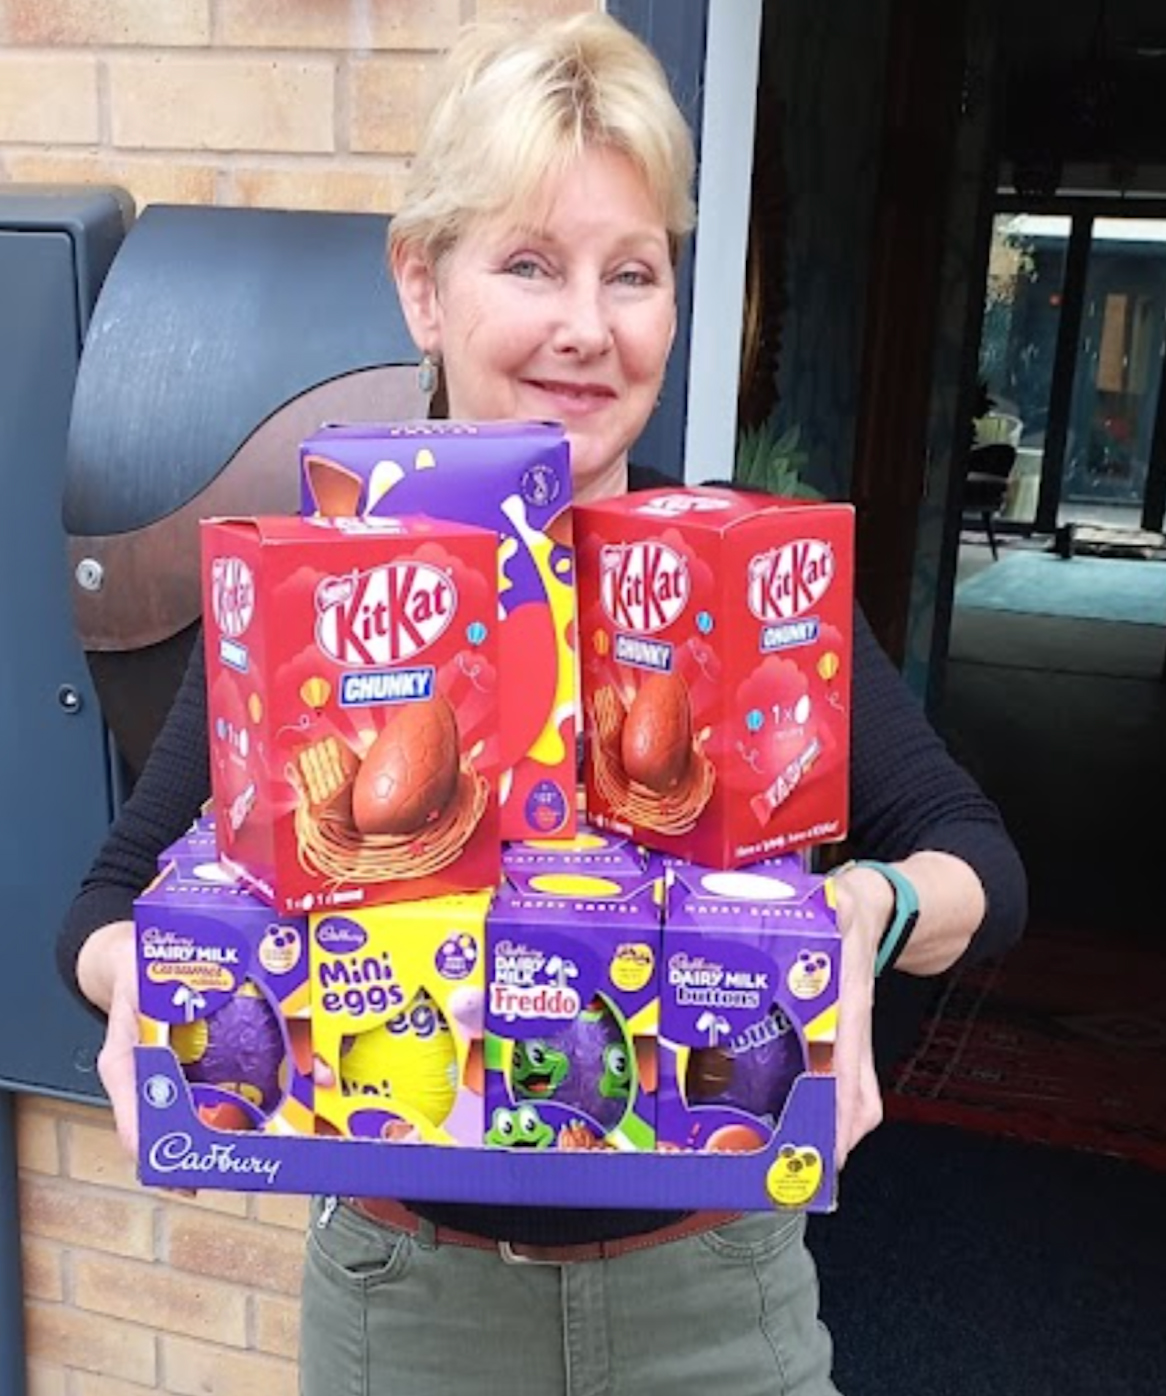 An image depicting Estelle Allam of Revival Residents Association carrying a tray of chocolate eggs